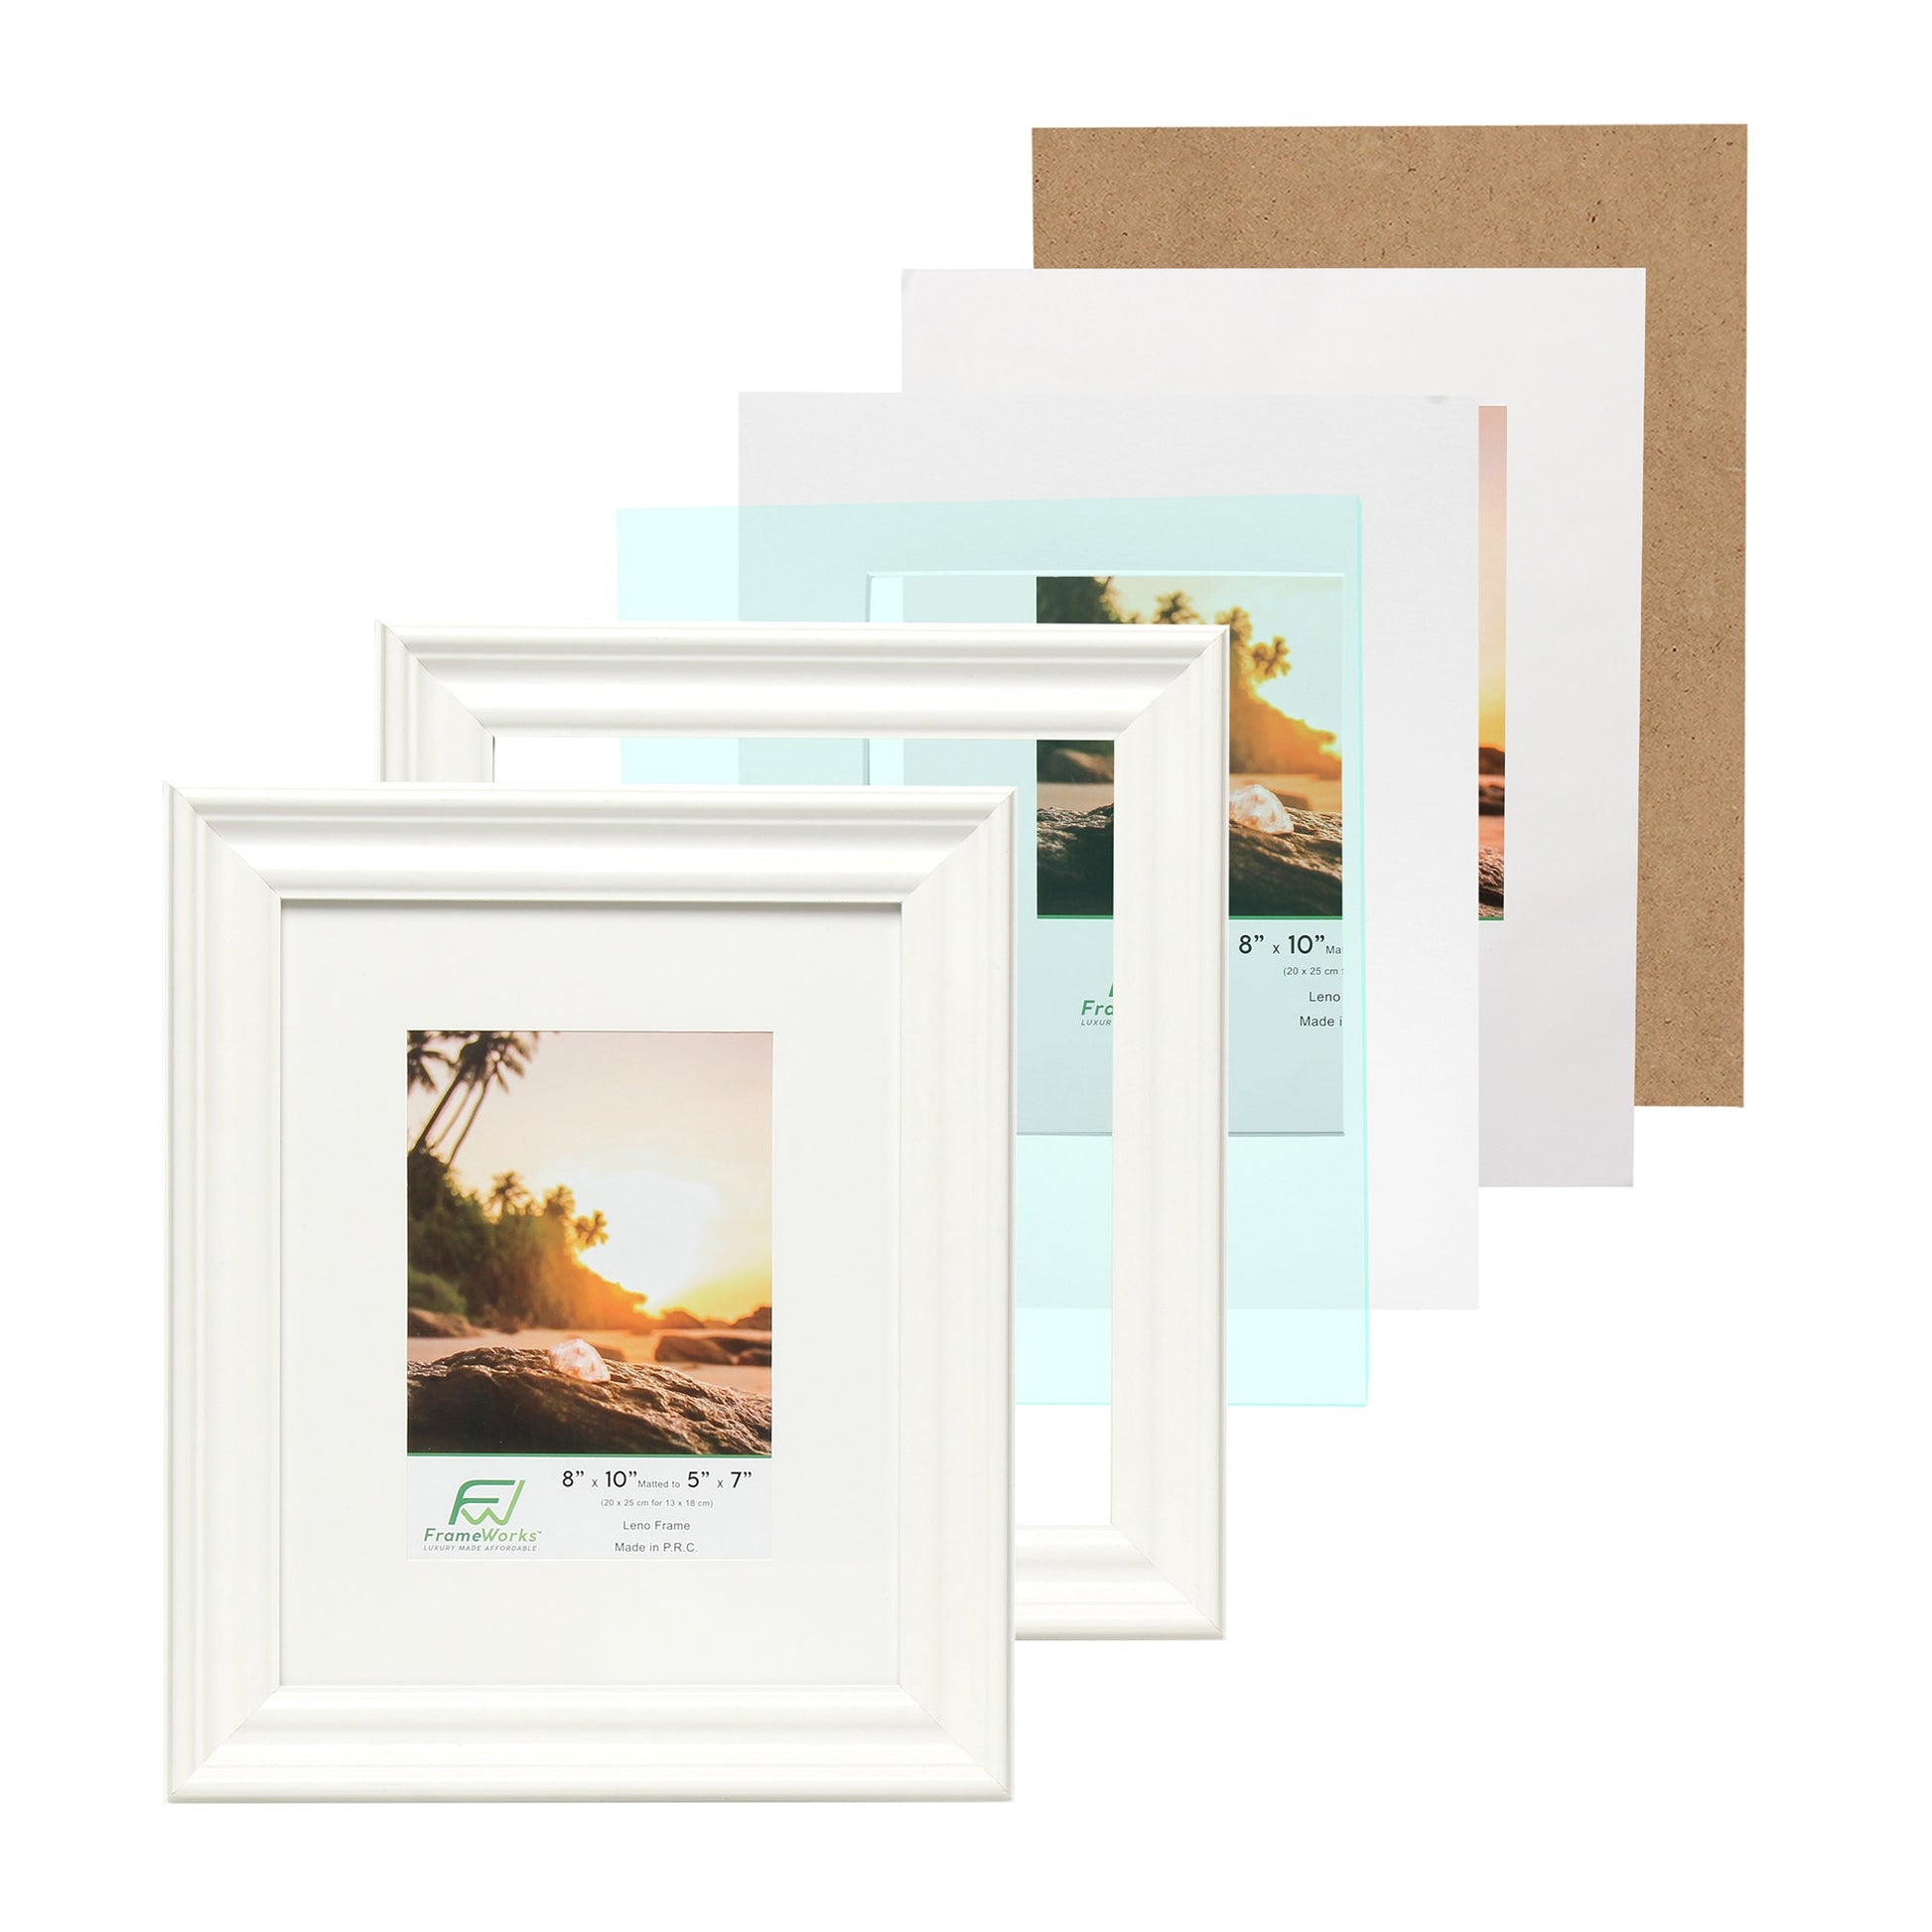 8" x 10" White Wood 2-Pack Picture Frames with Molded Edges, 5" x 7" Matted